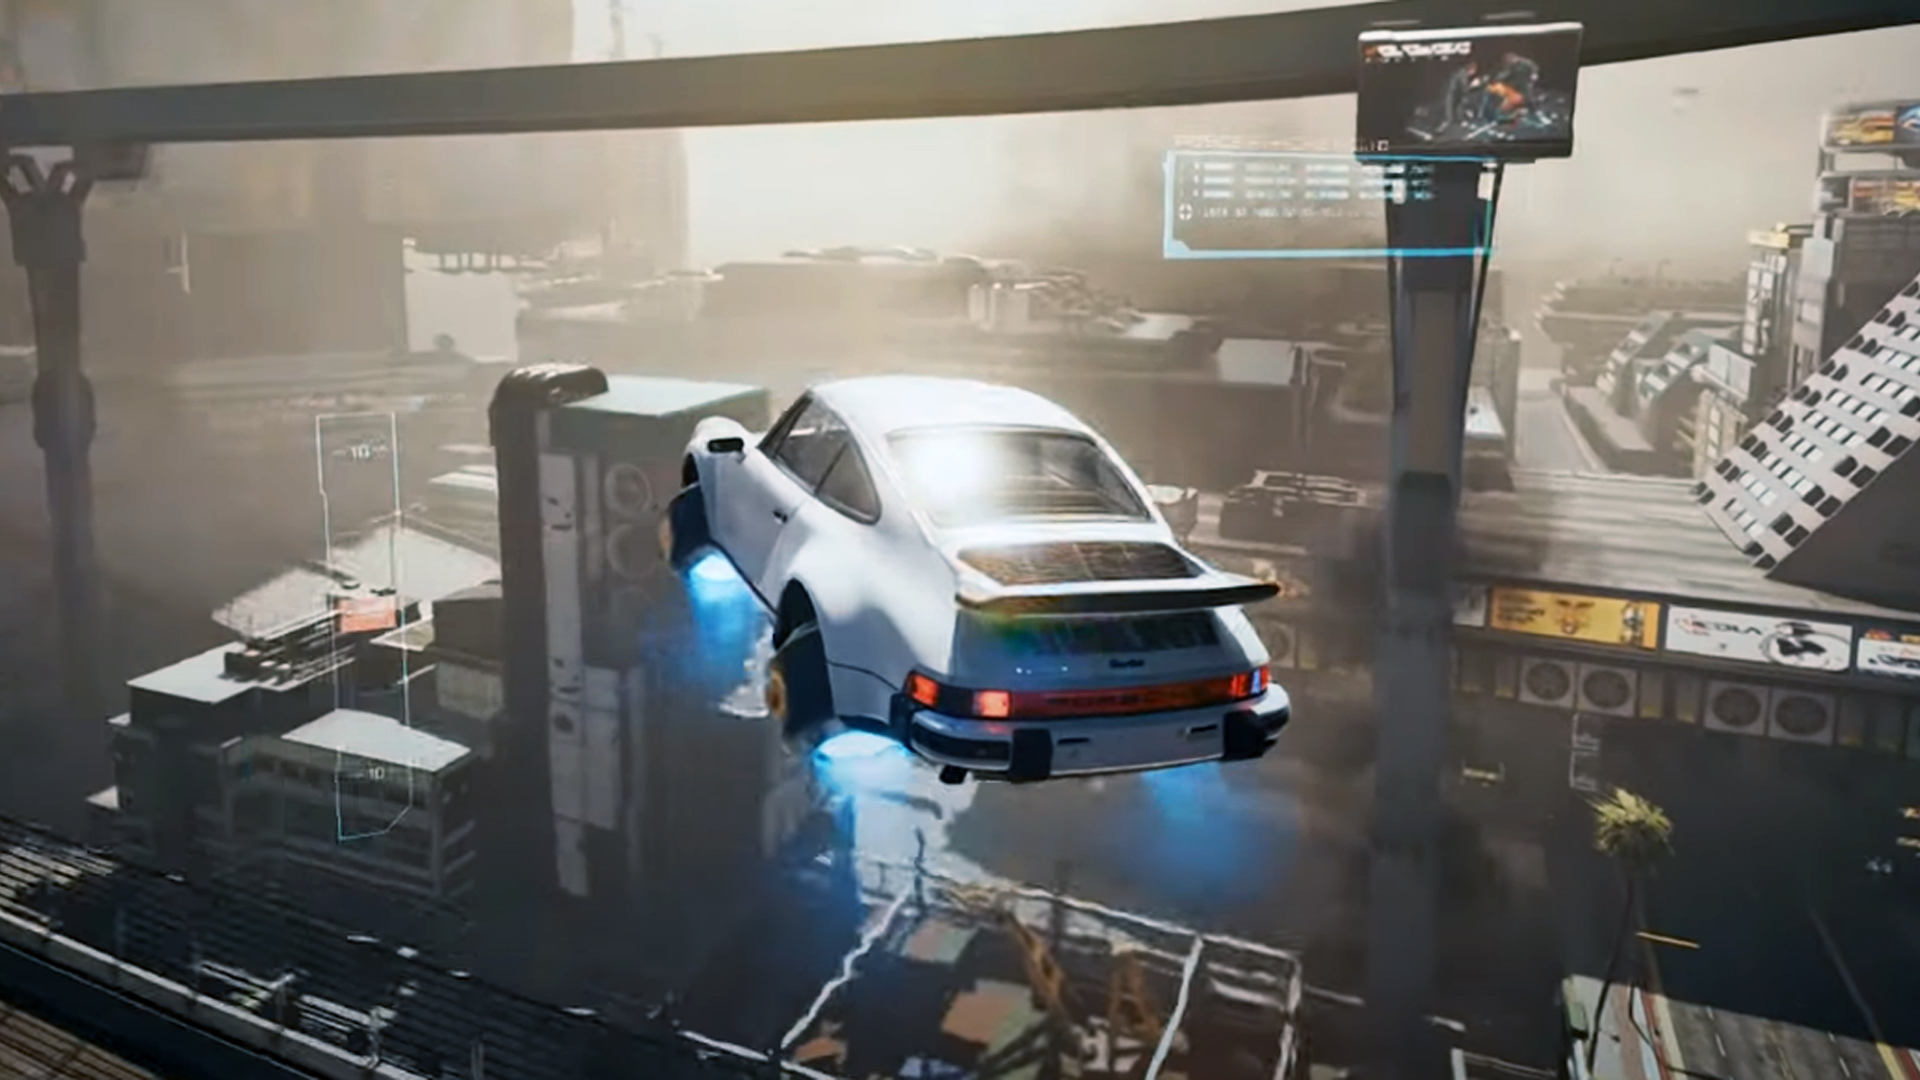 Finally, a Cyberpunk 2077 mod that gives you a flying car